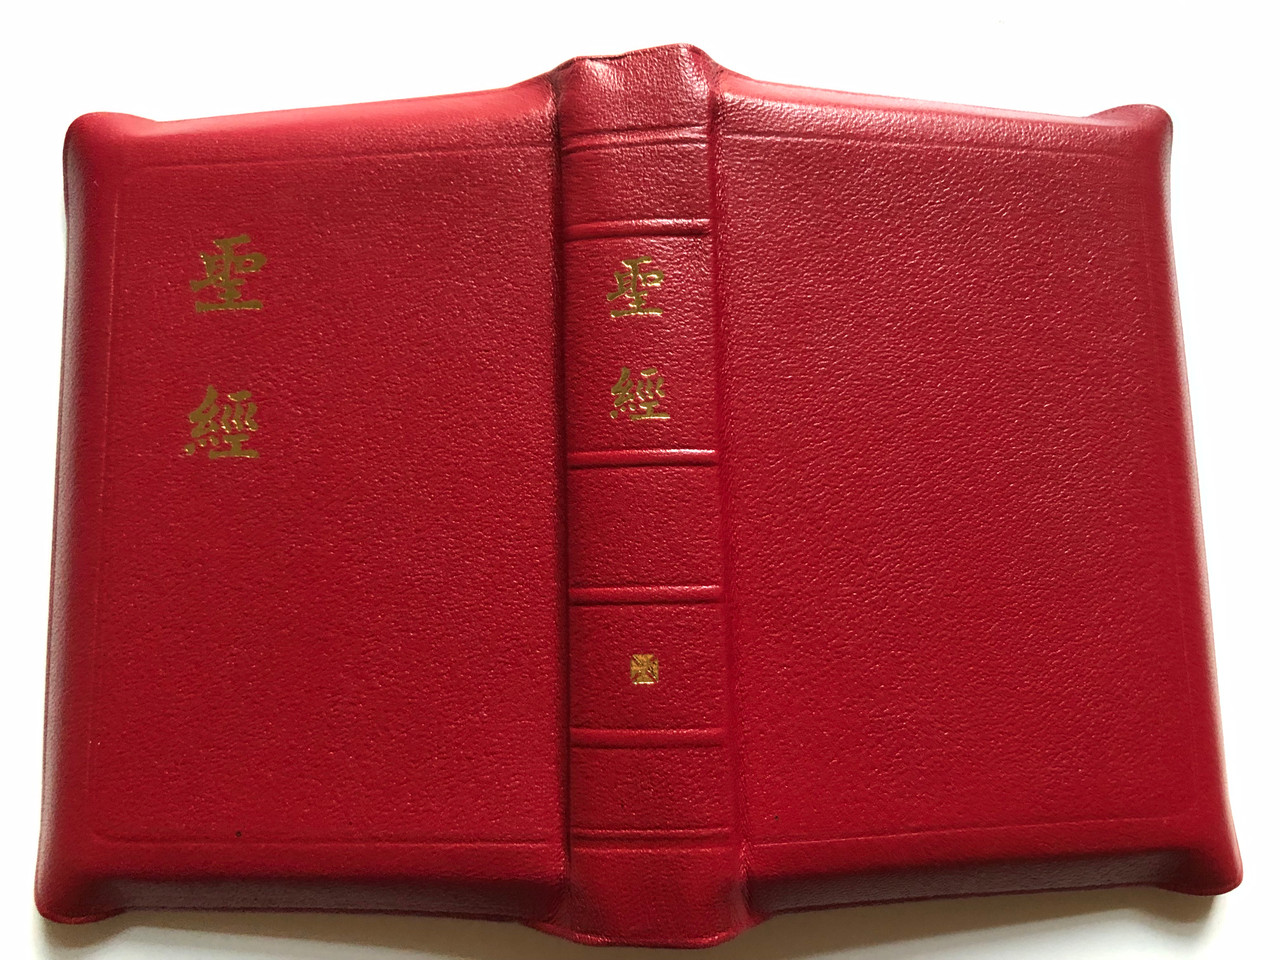 https://cdn10.bigcommerce.com/s-62bdpkt7pb/products/50654/images/258333/Red_leather_cover_Chinese_Holy_Bible_18__88494.1668175298.1280.1280.JPG?c=2